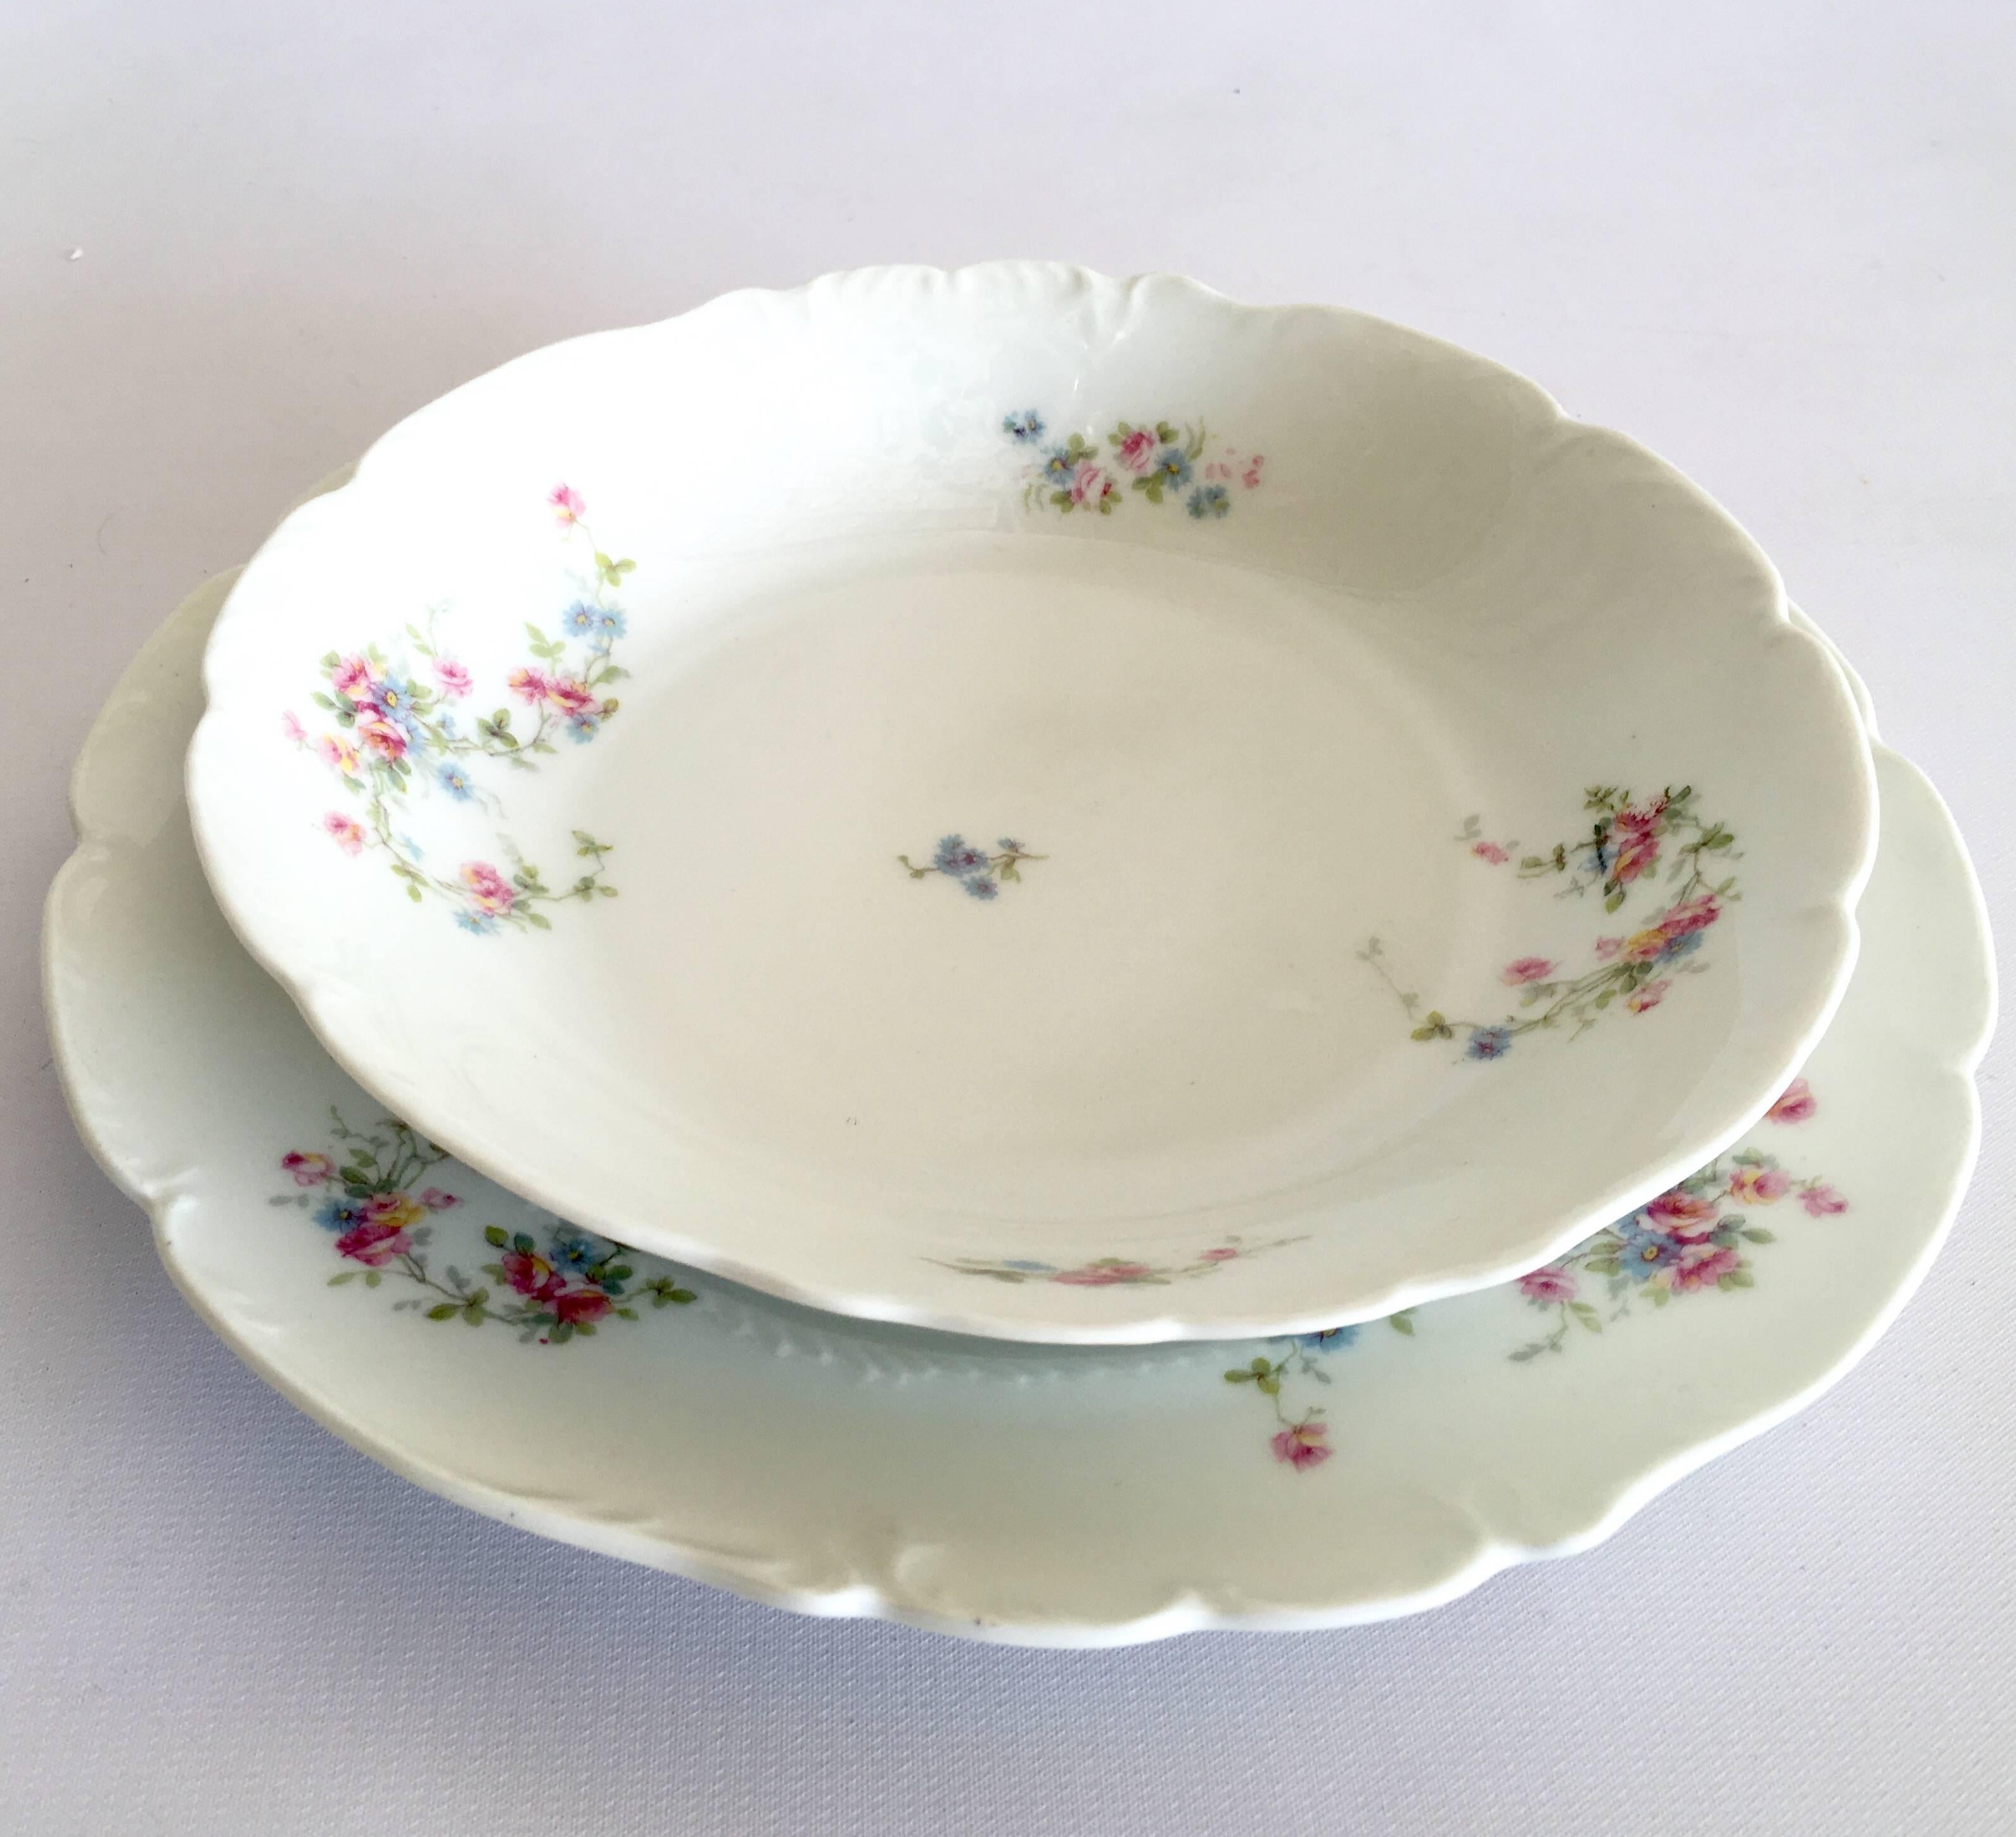 limoges china patterns 1920's